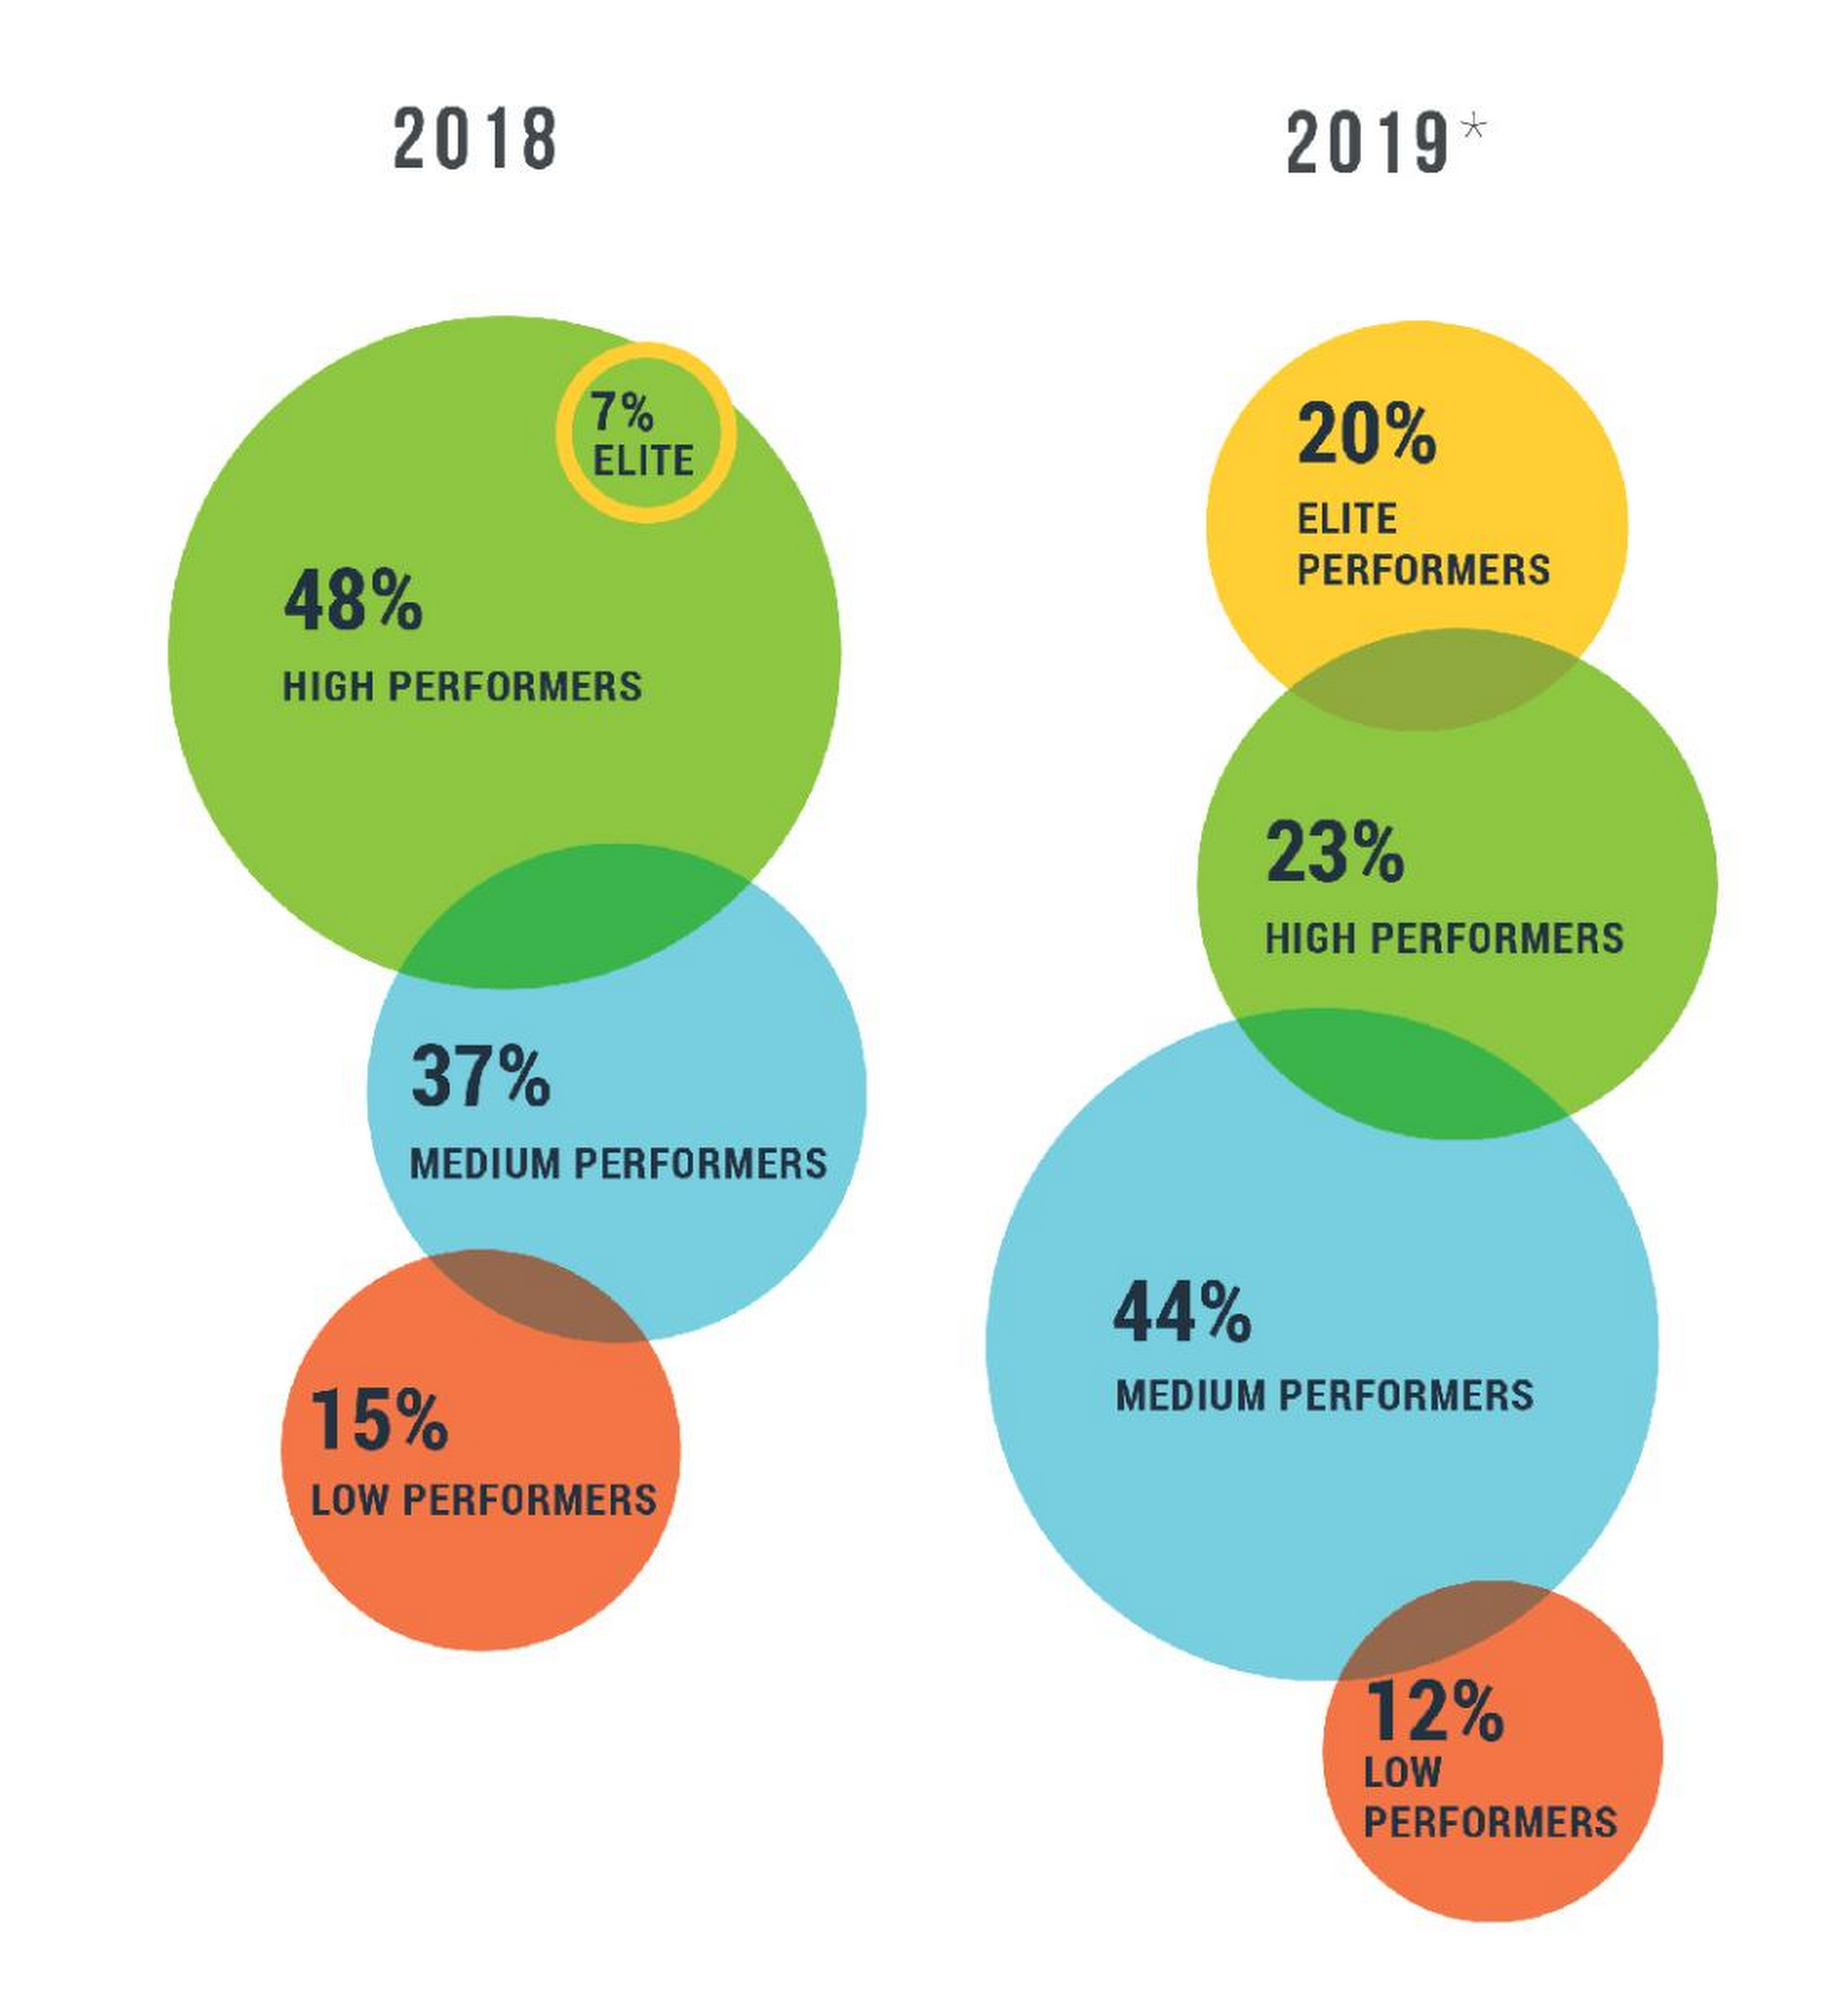 Analyzing the 2019 Accelerate State of Devops Report 3 key findings